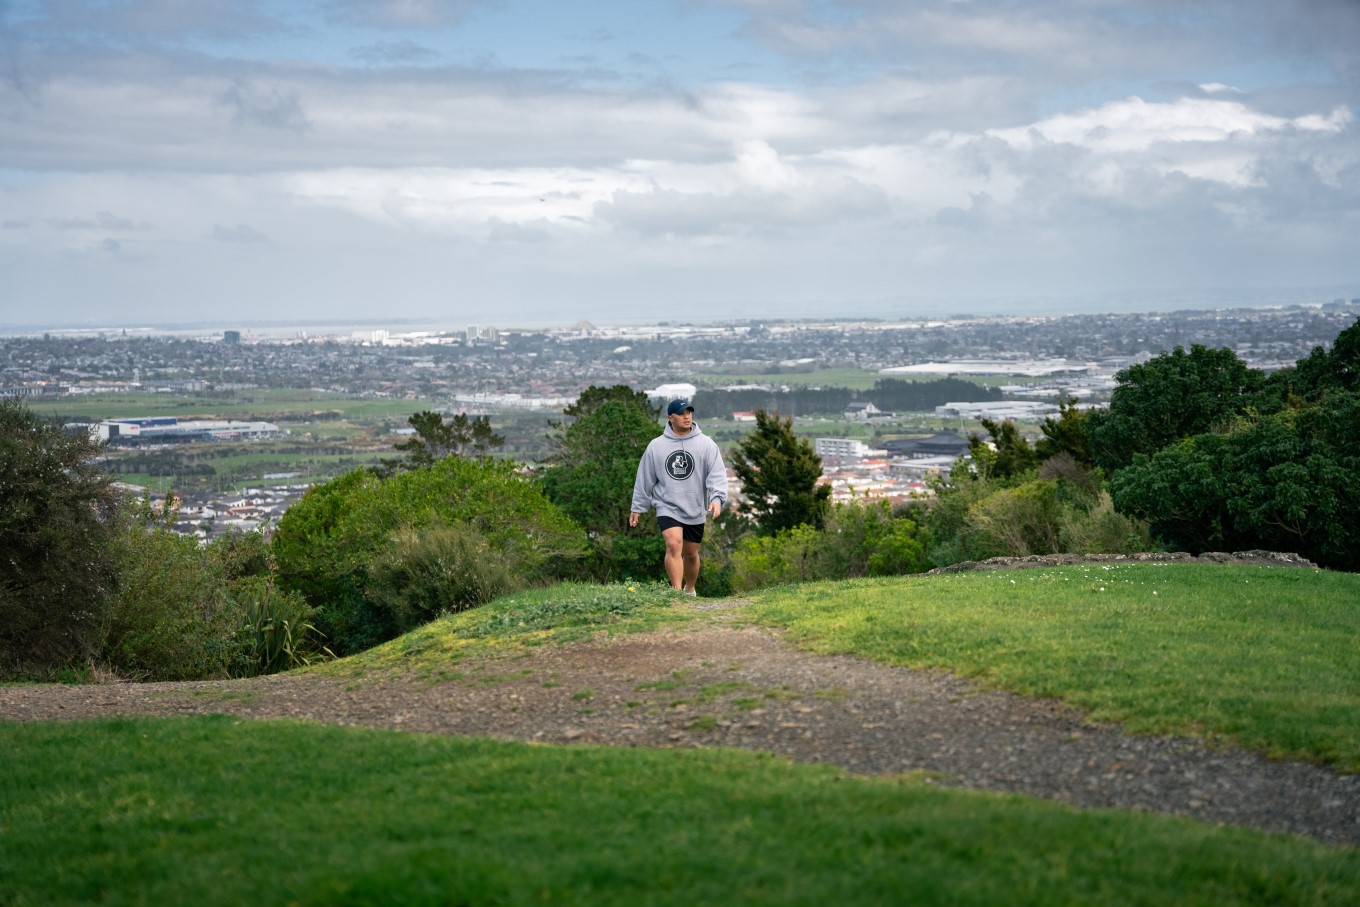 Point View Reserve in East Tamaki has panoramic views across the region.